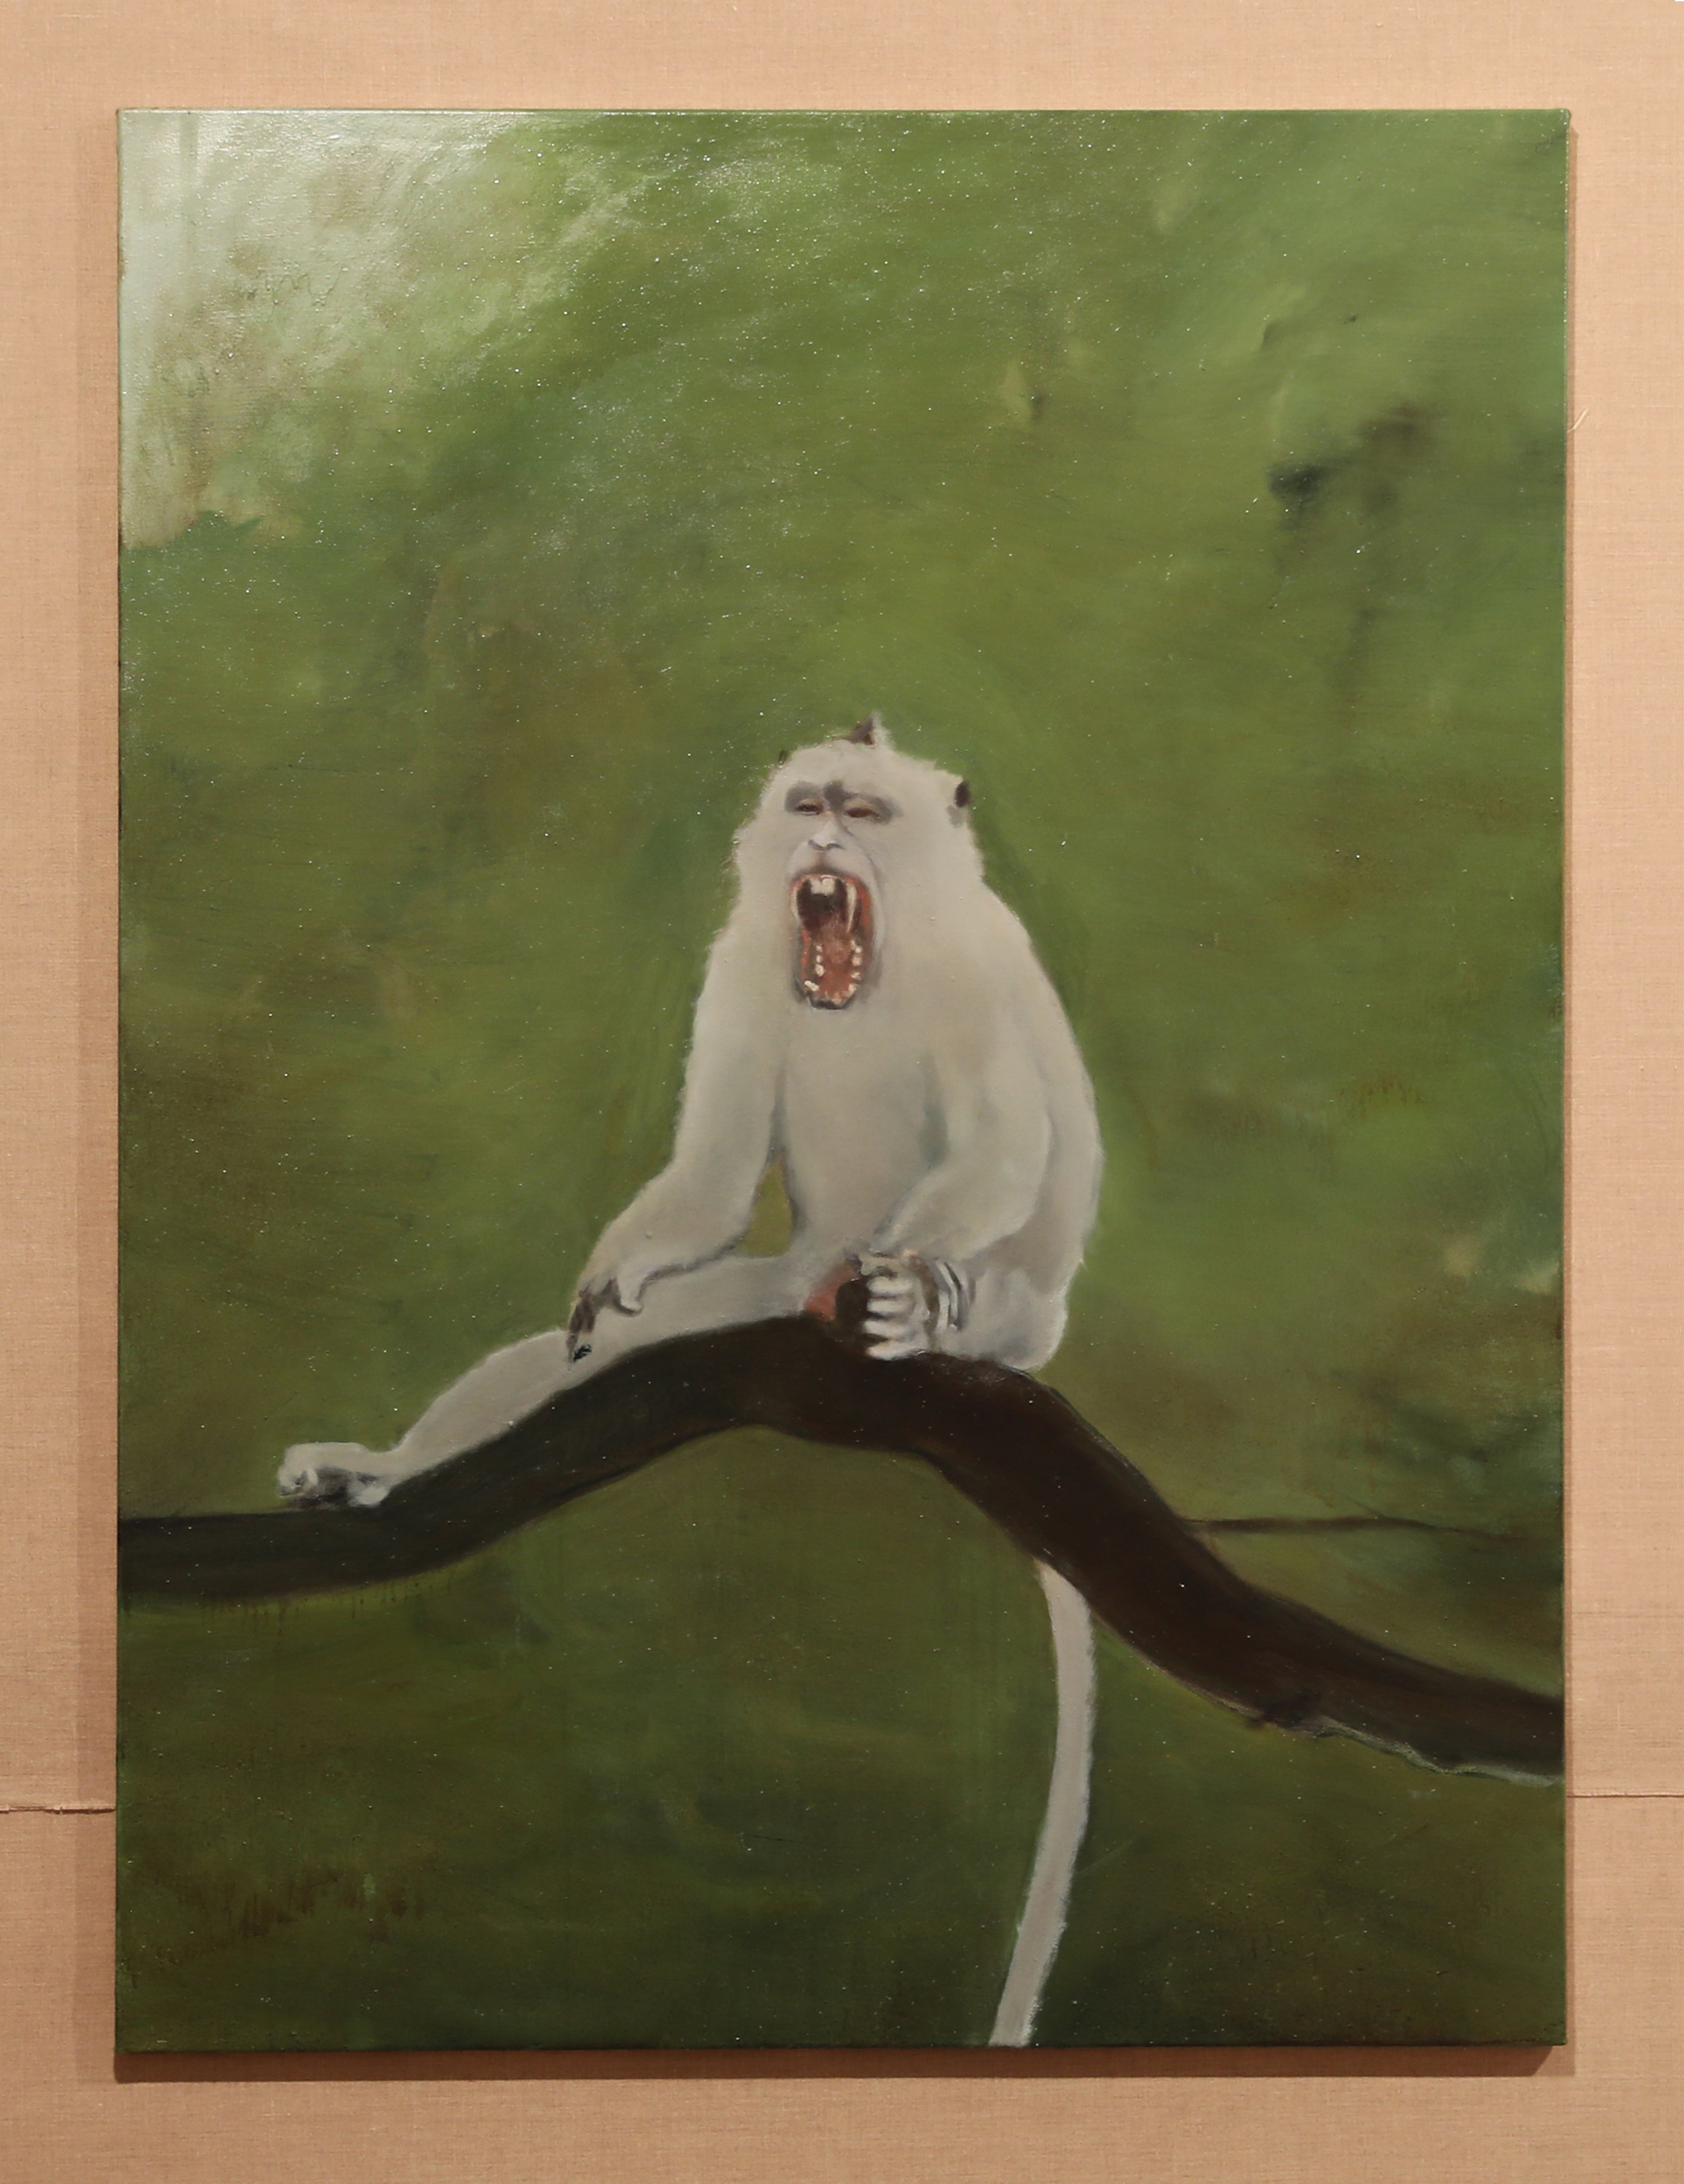  ‘The Mark (Macaca fascicularis)’ 2019, oil on canvas   